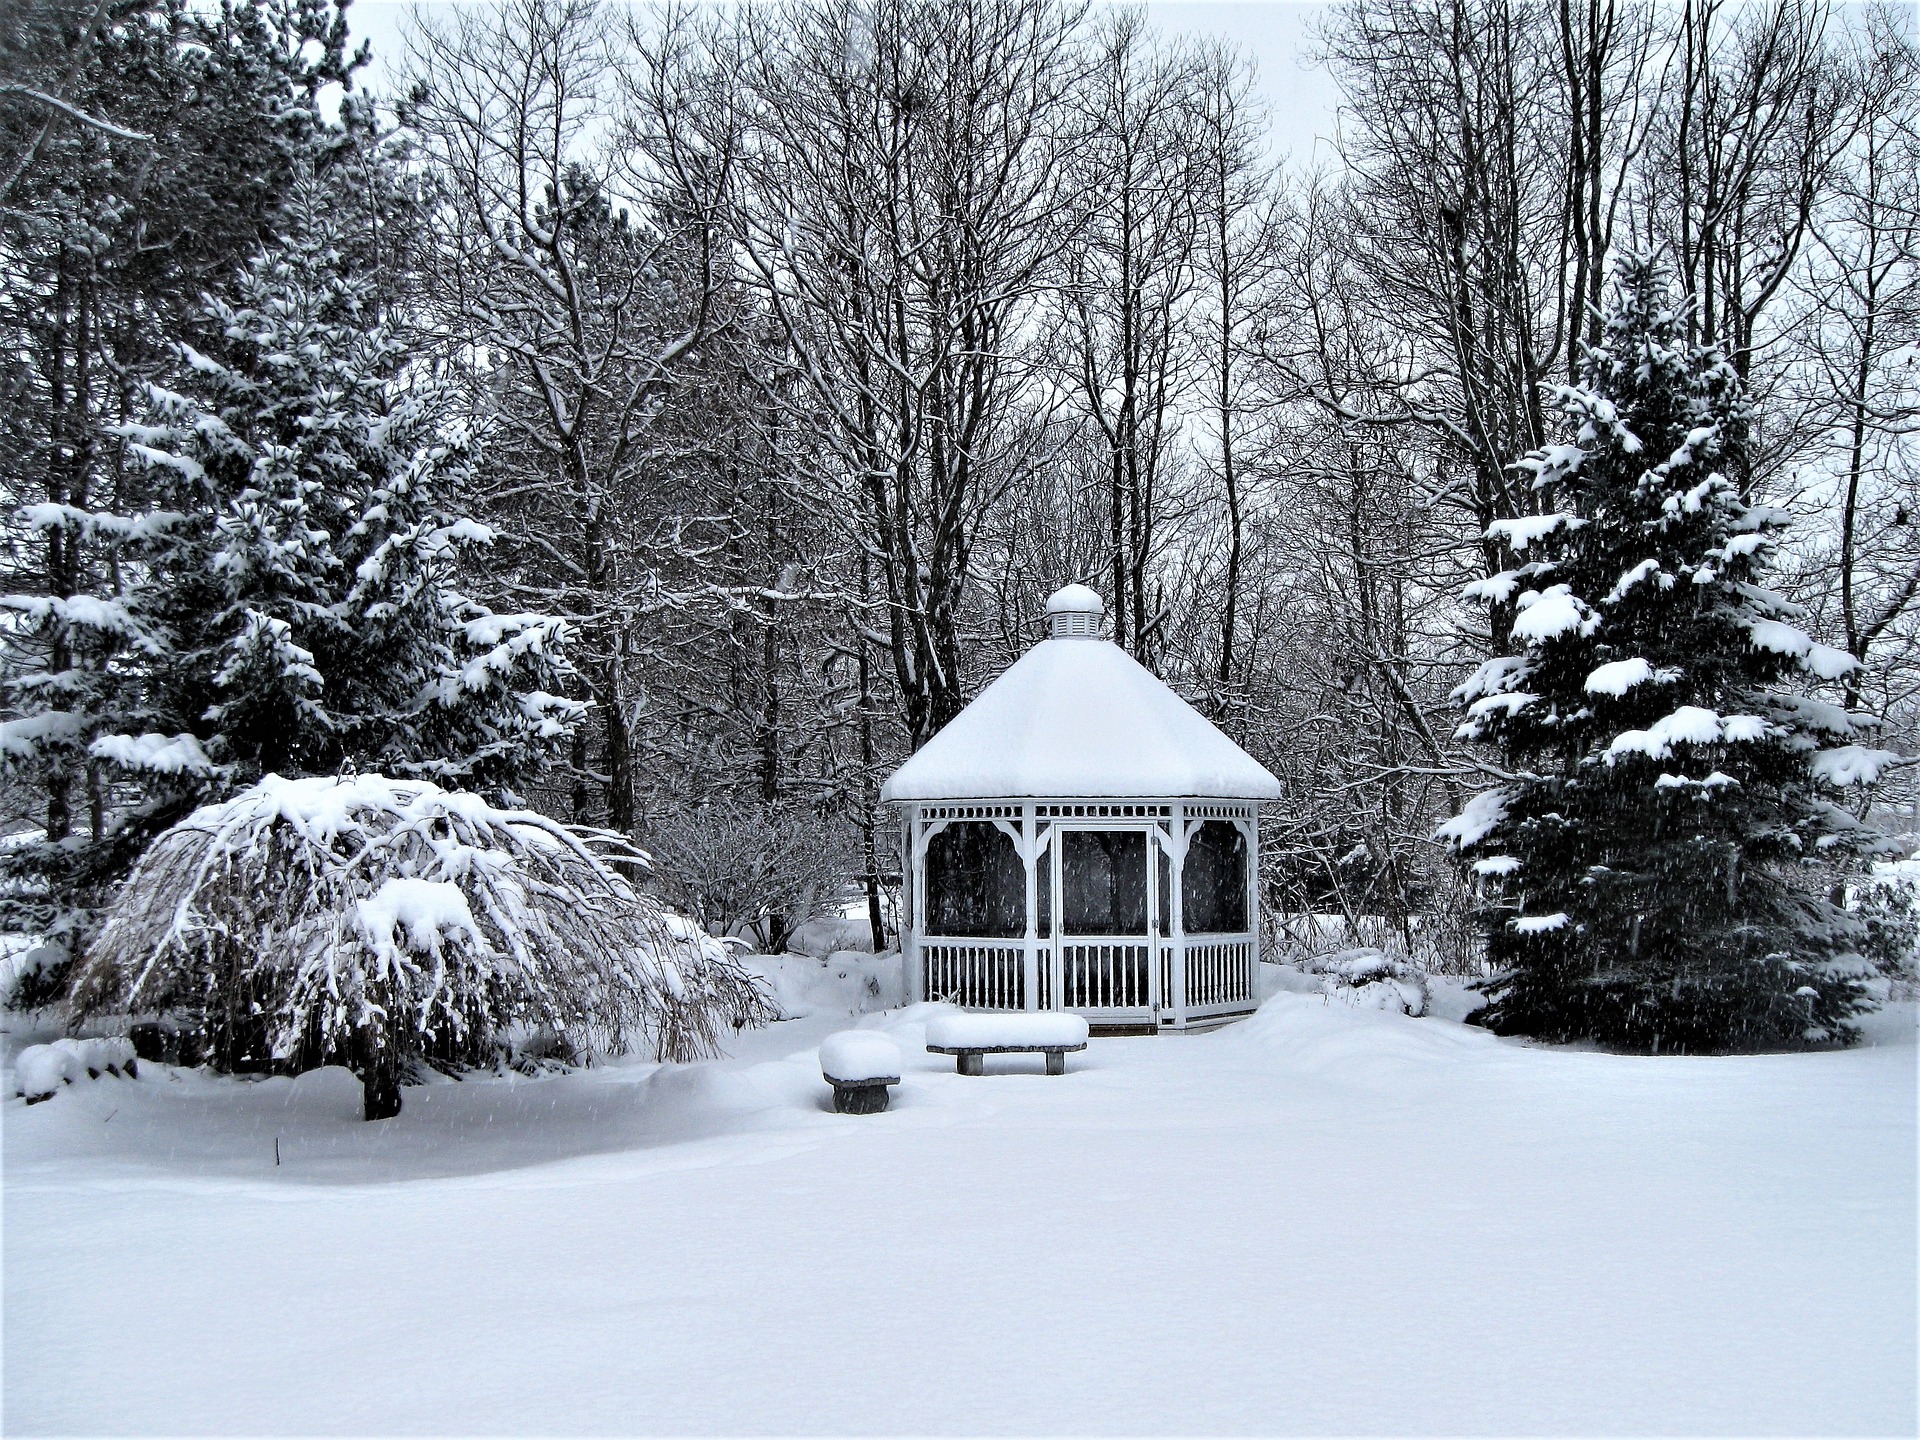 Deciduous and evergreen trees surround a gazebo, all covered in a dusting of snow.